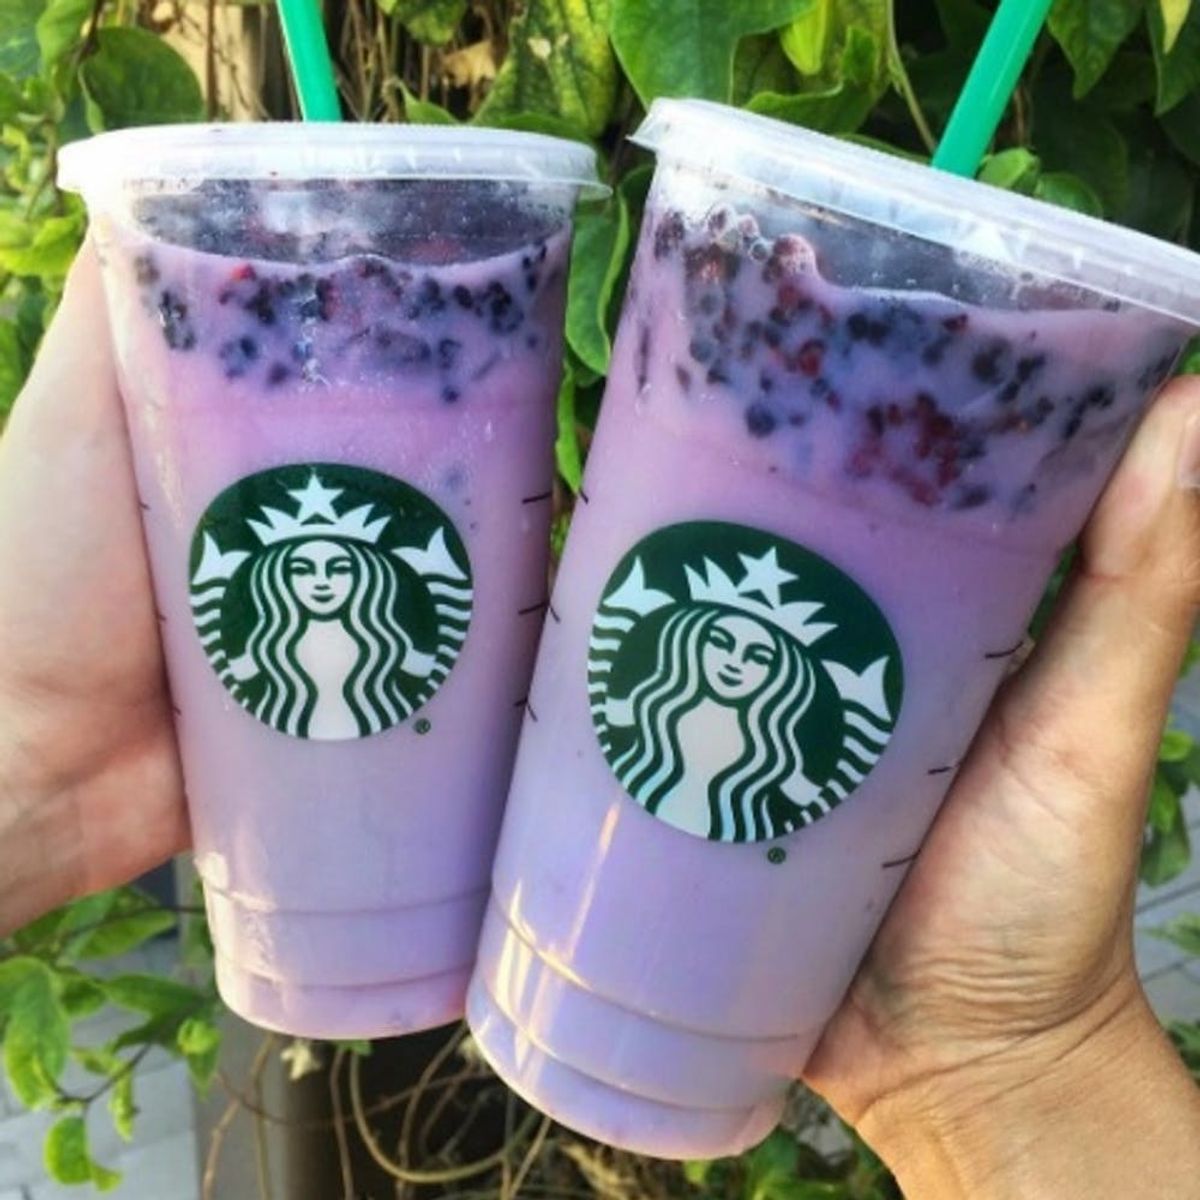 Forget Pink Because Starbucks’ “Purple Drink” Is the New Tasty Trend